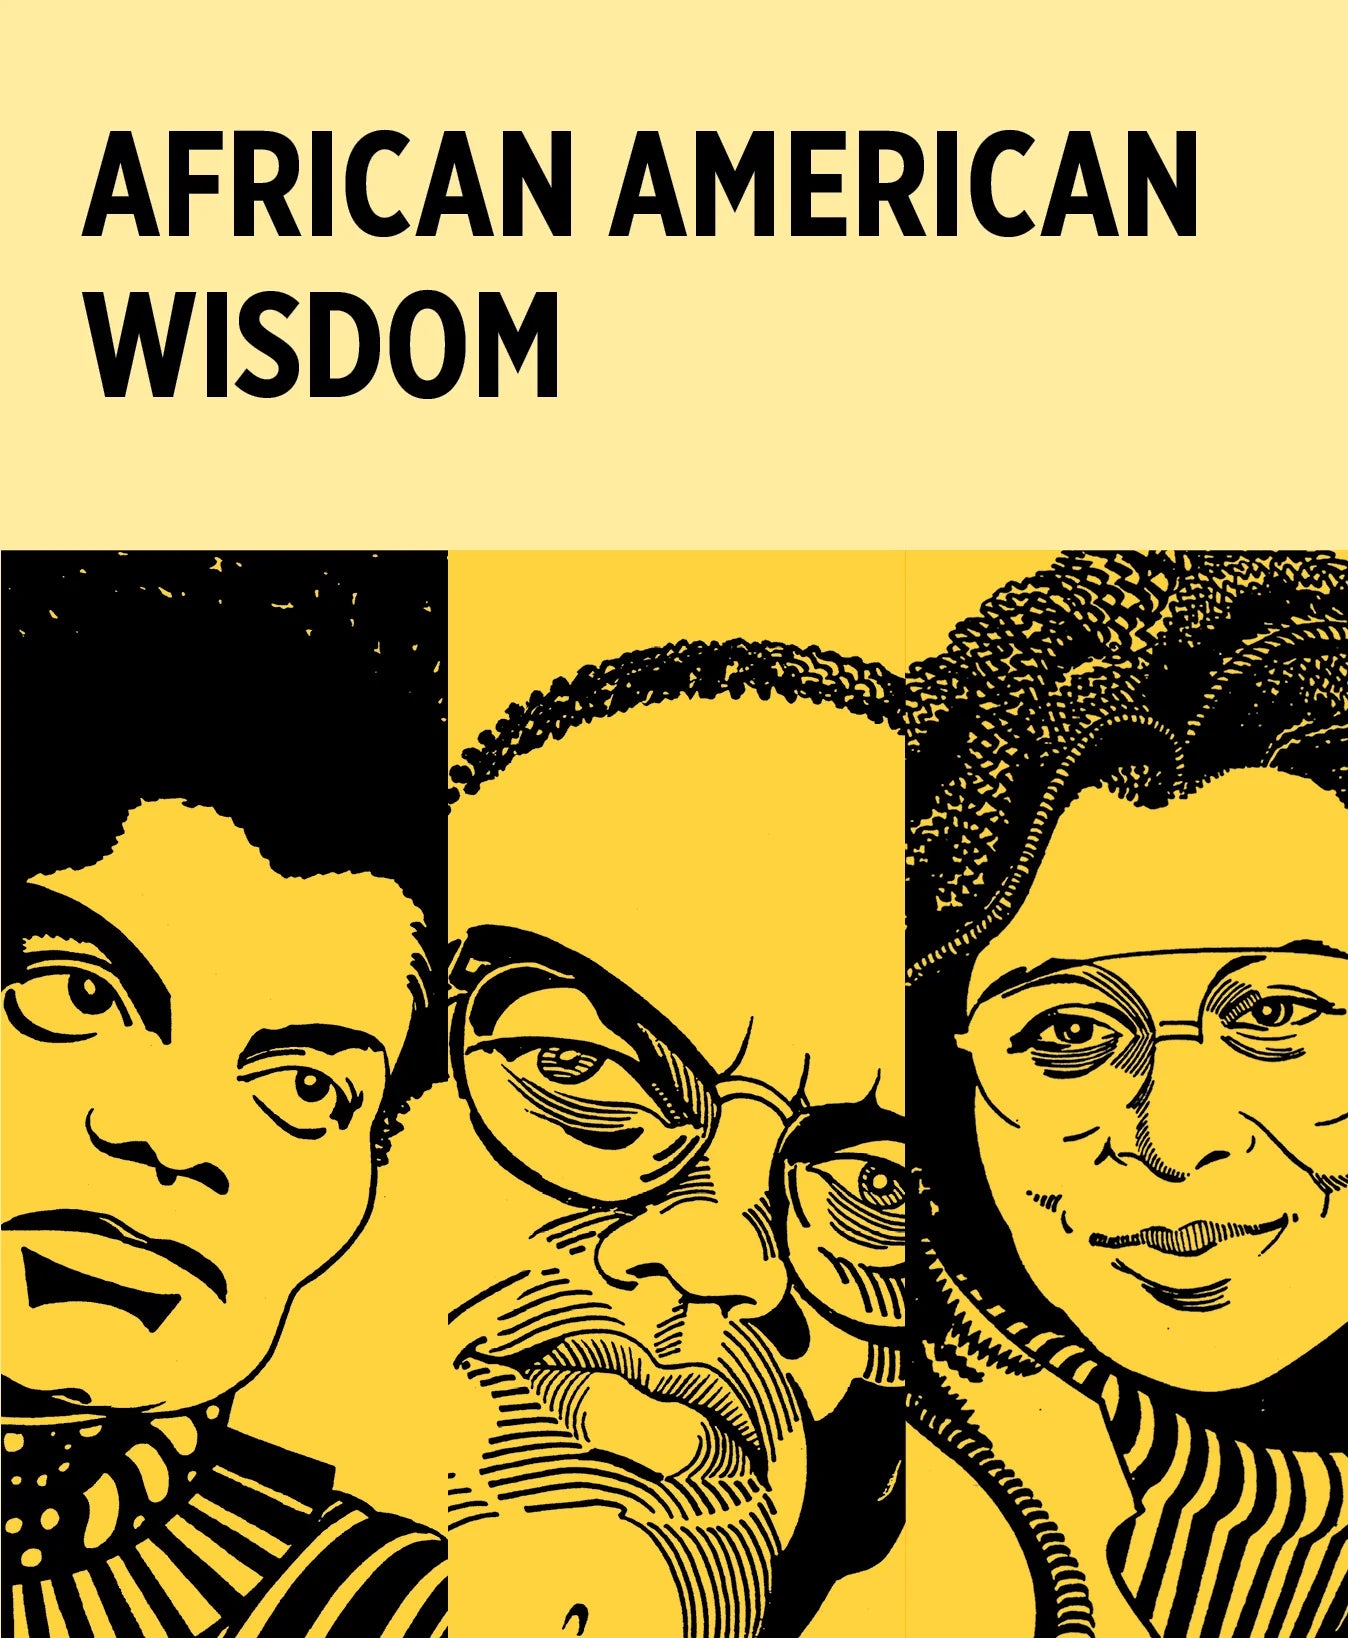 African American Wisdom Knowledge Cards